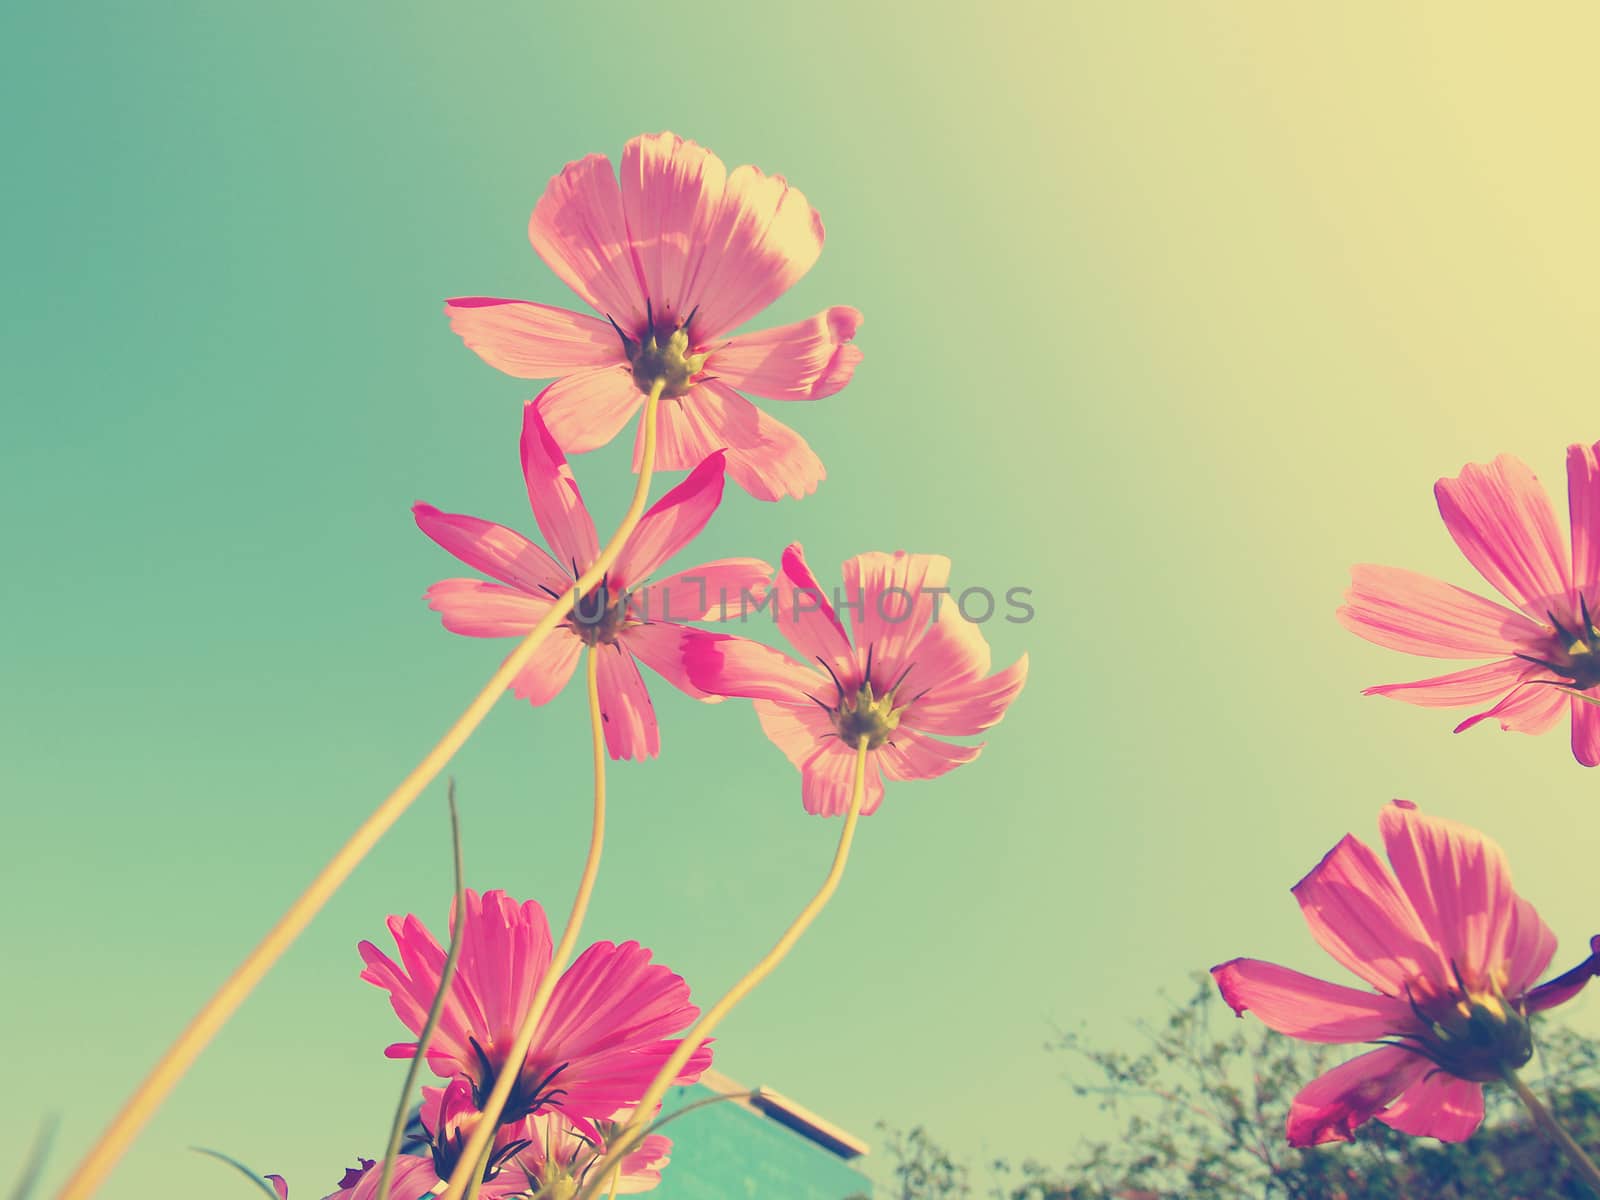 Cosmos flowers and blue sky (vintage tone) by jakgree